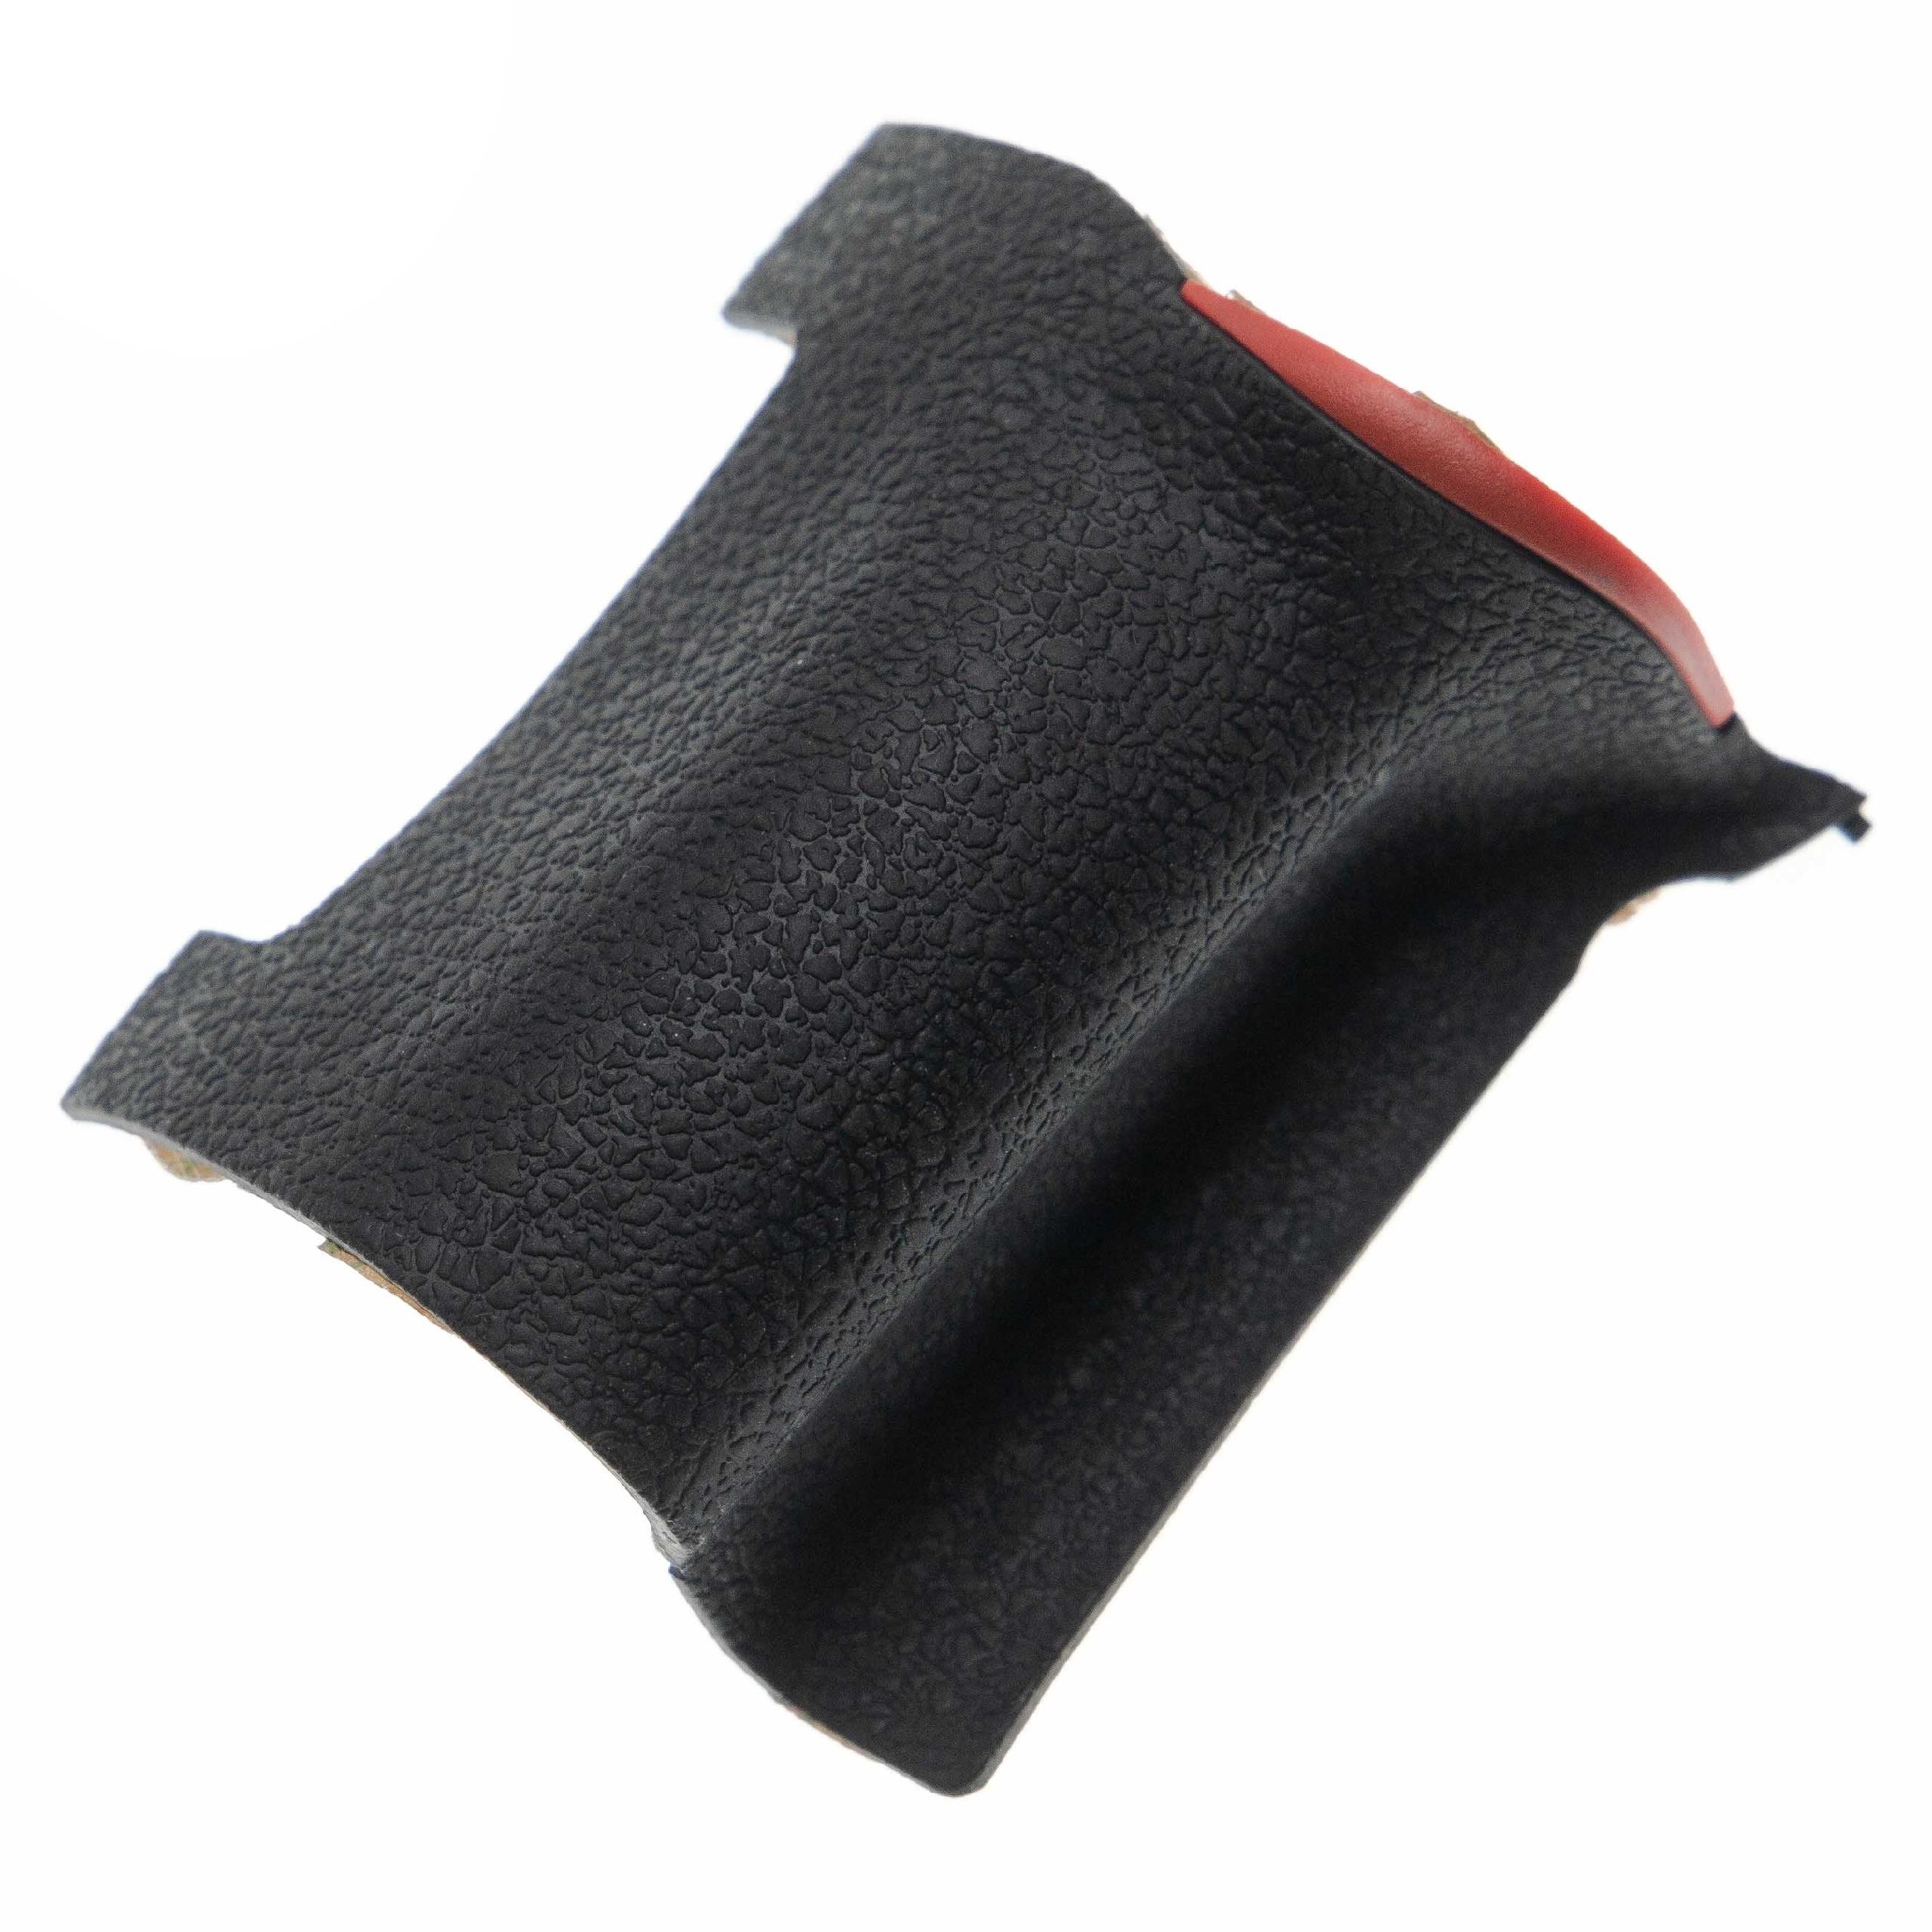 Rubber Grip Tape suitable for Nikon D750 Camera - Repair Part for Body Front, Self-Adhesive, Red Black